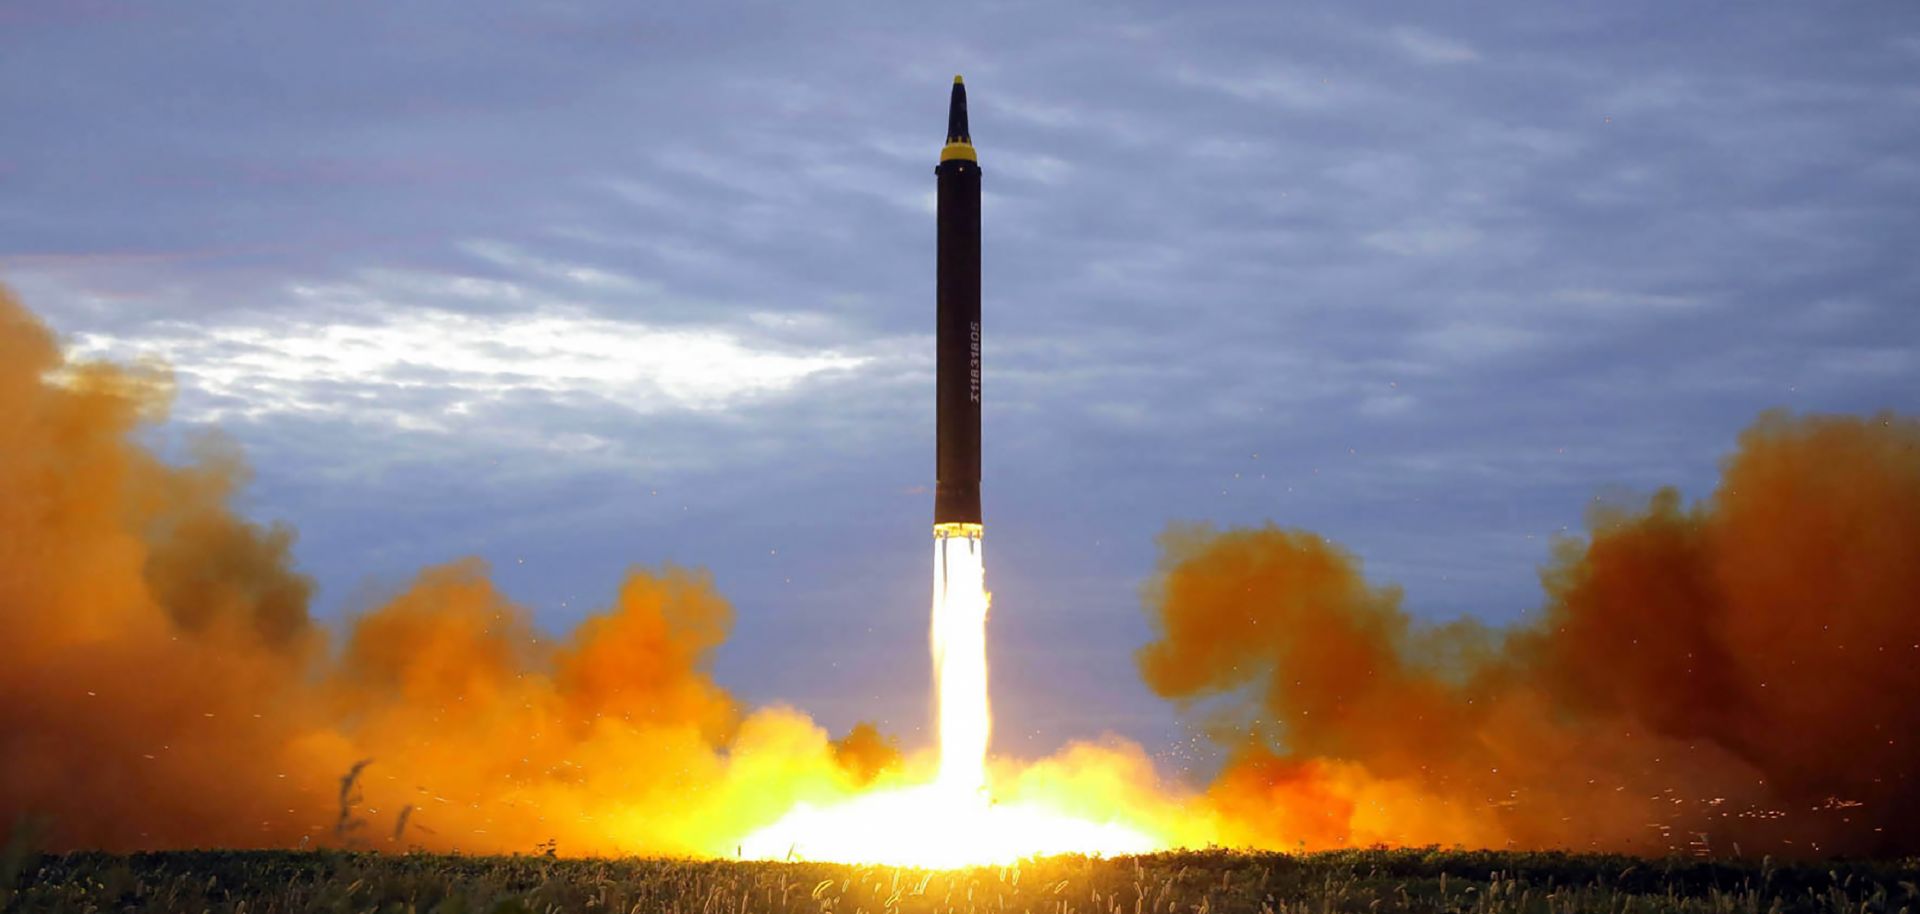 An image released by North Korea's official Korean Central News Agency shows the launch of a Hwasong-12 intermediate-range ballistic missile on Aug. 29, 2017.